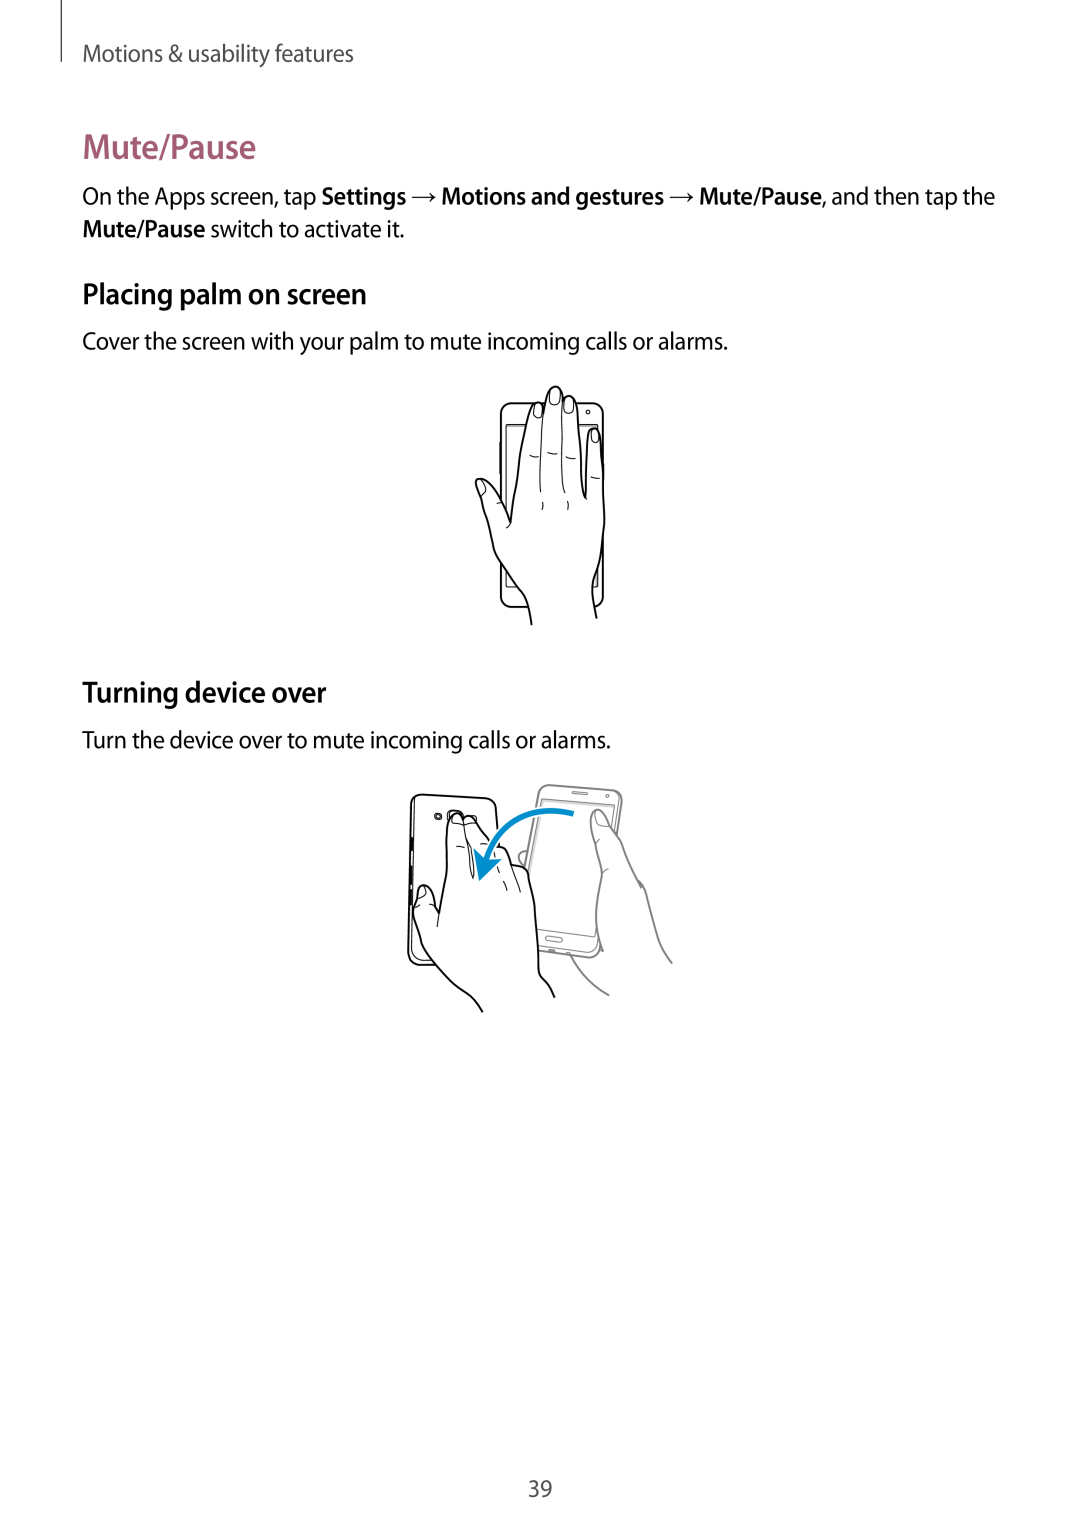 Samsung SM-A300FZKUDRE manual Mute/Pause, Placing palm on screen, Turning device over, Motions & usability features 